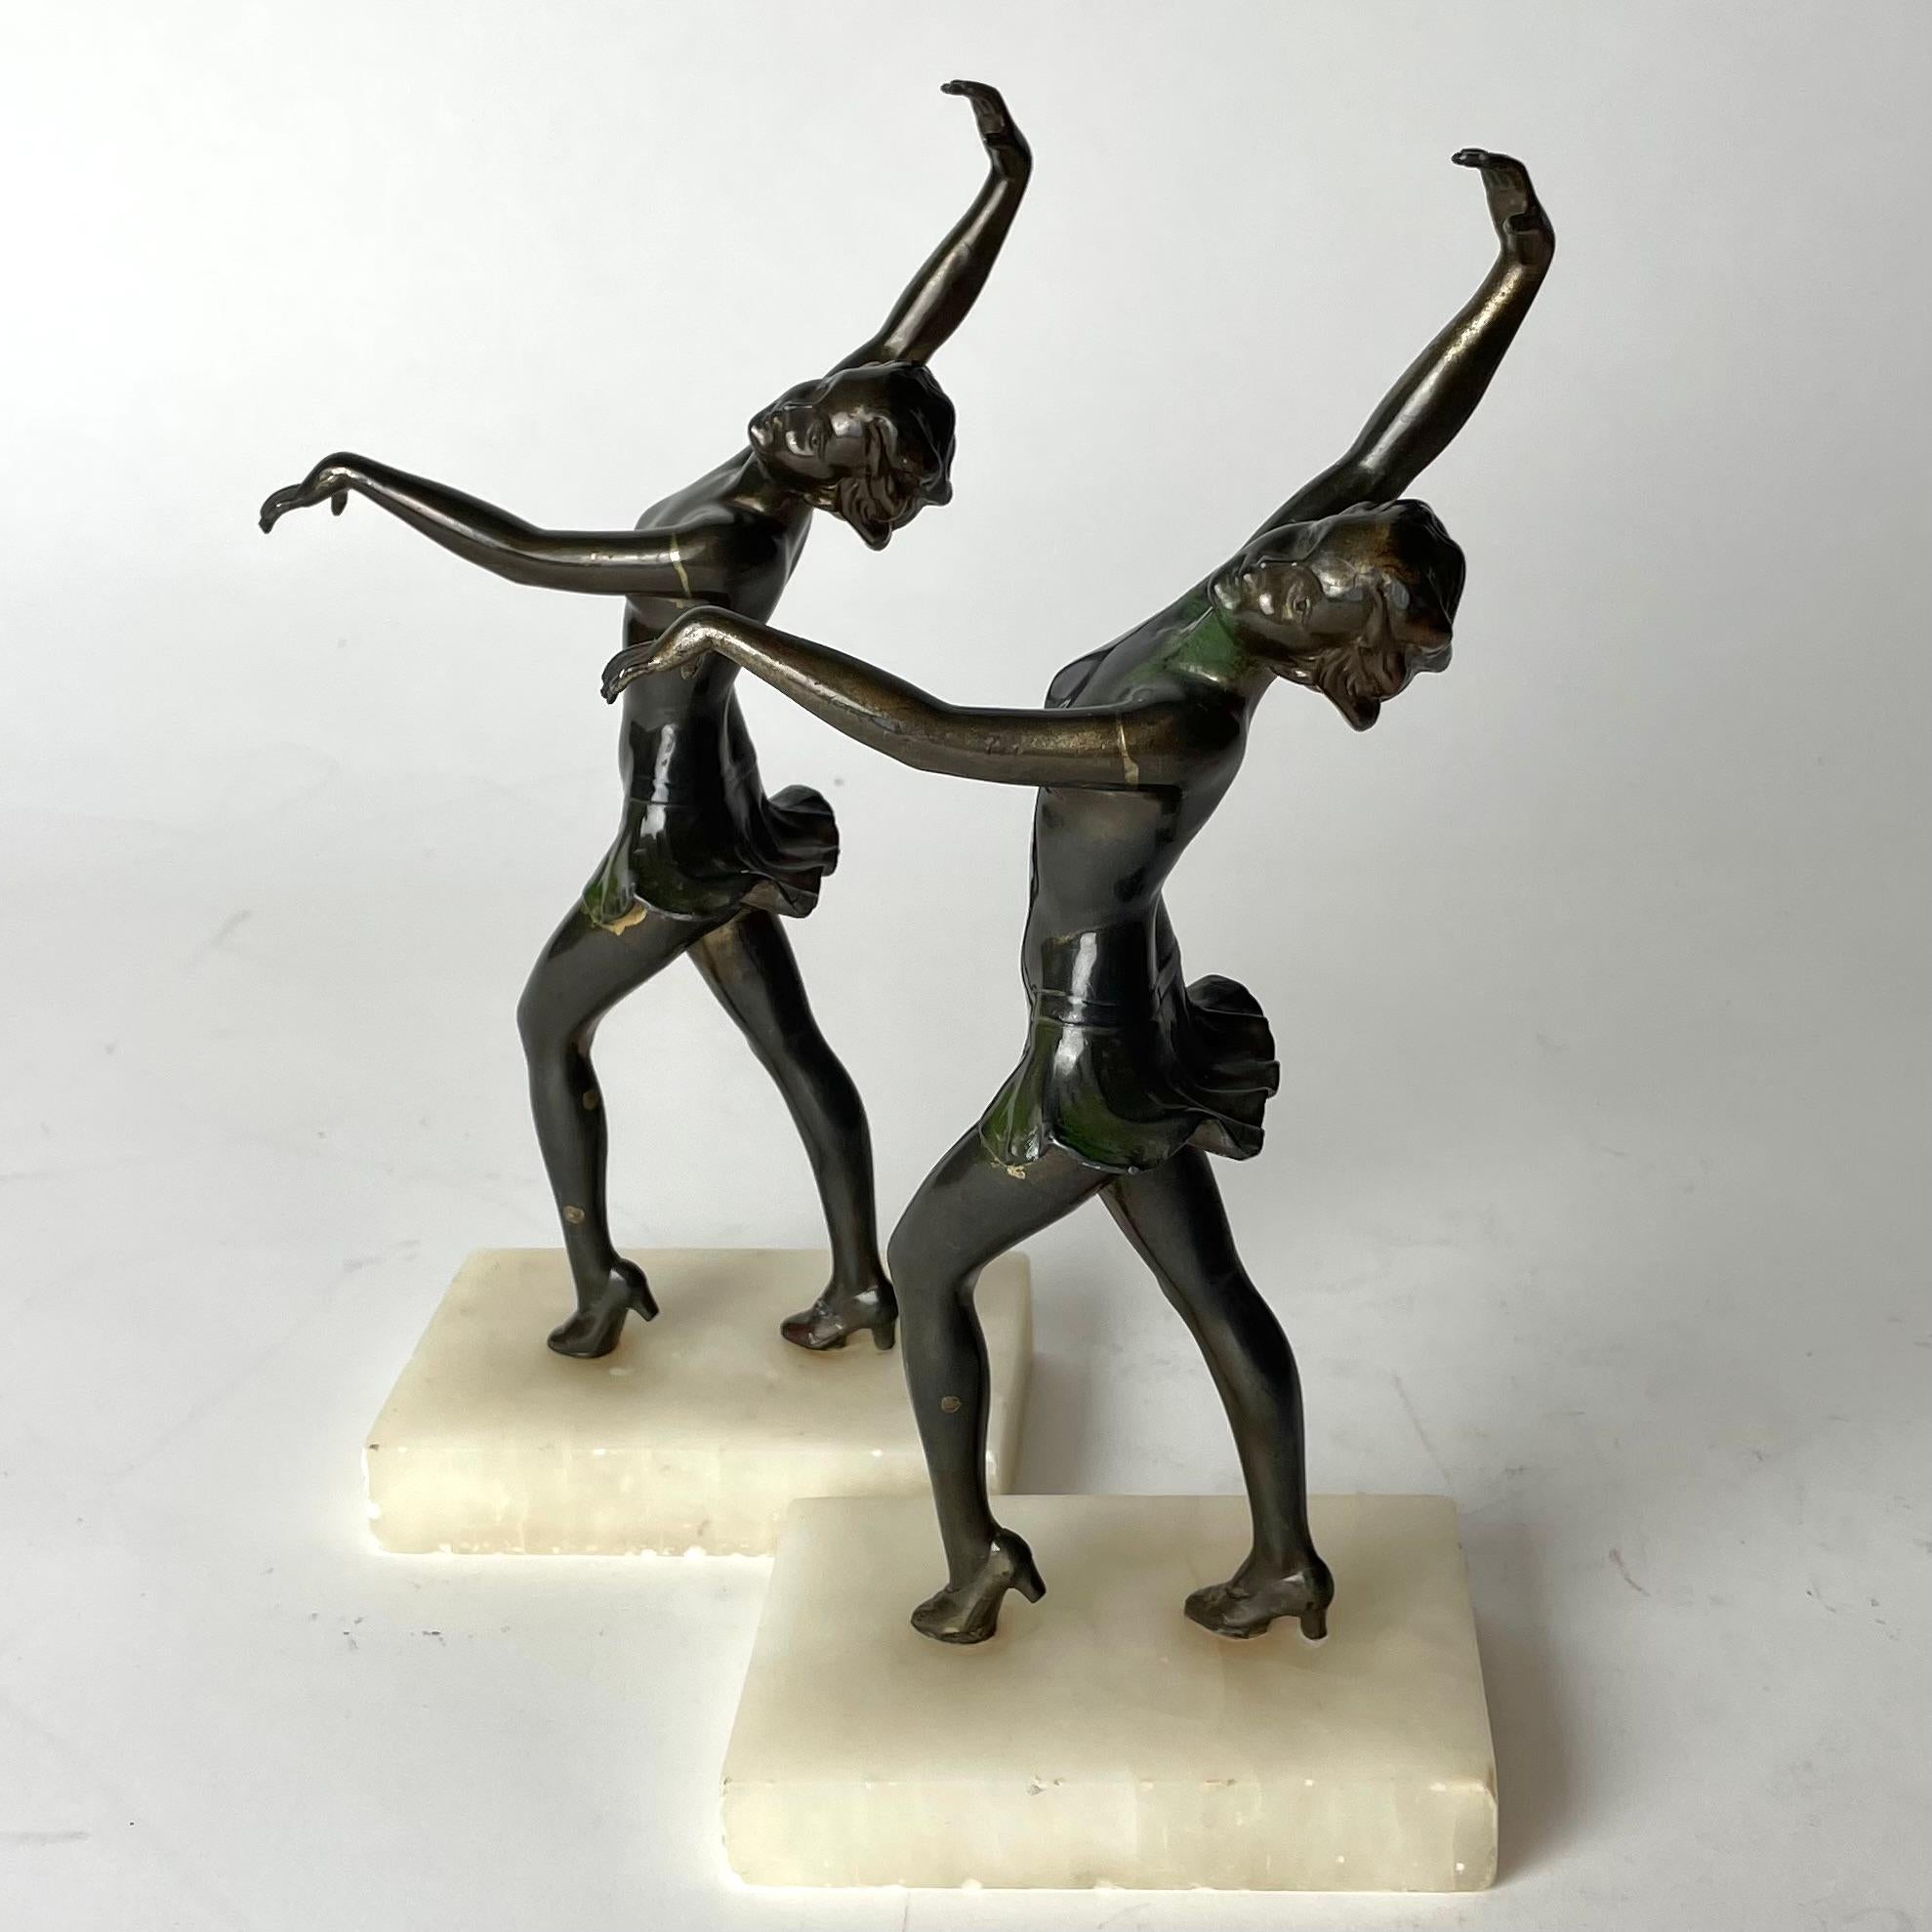 Metal A pair of period Art Deco Bookends from 1920s-1930s with dancing women.